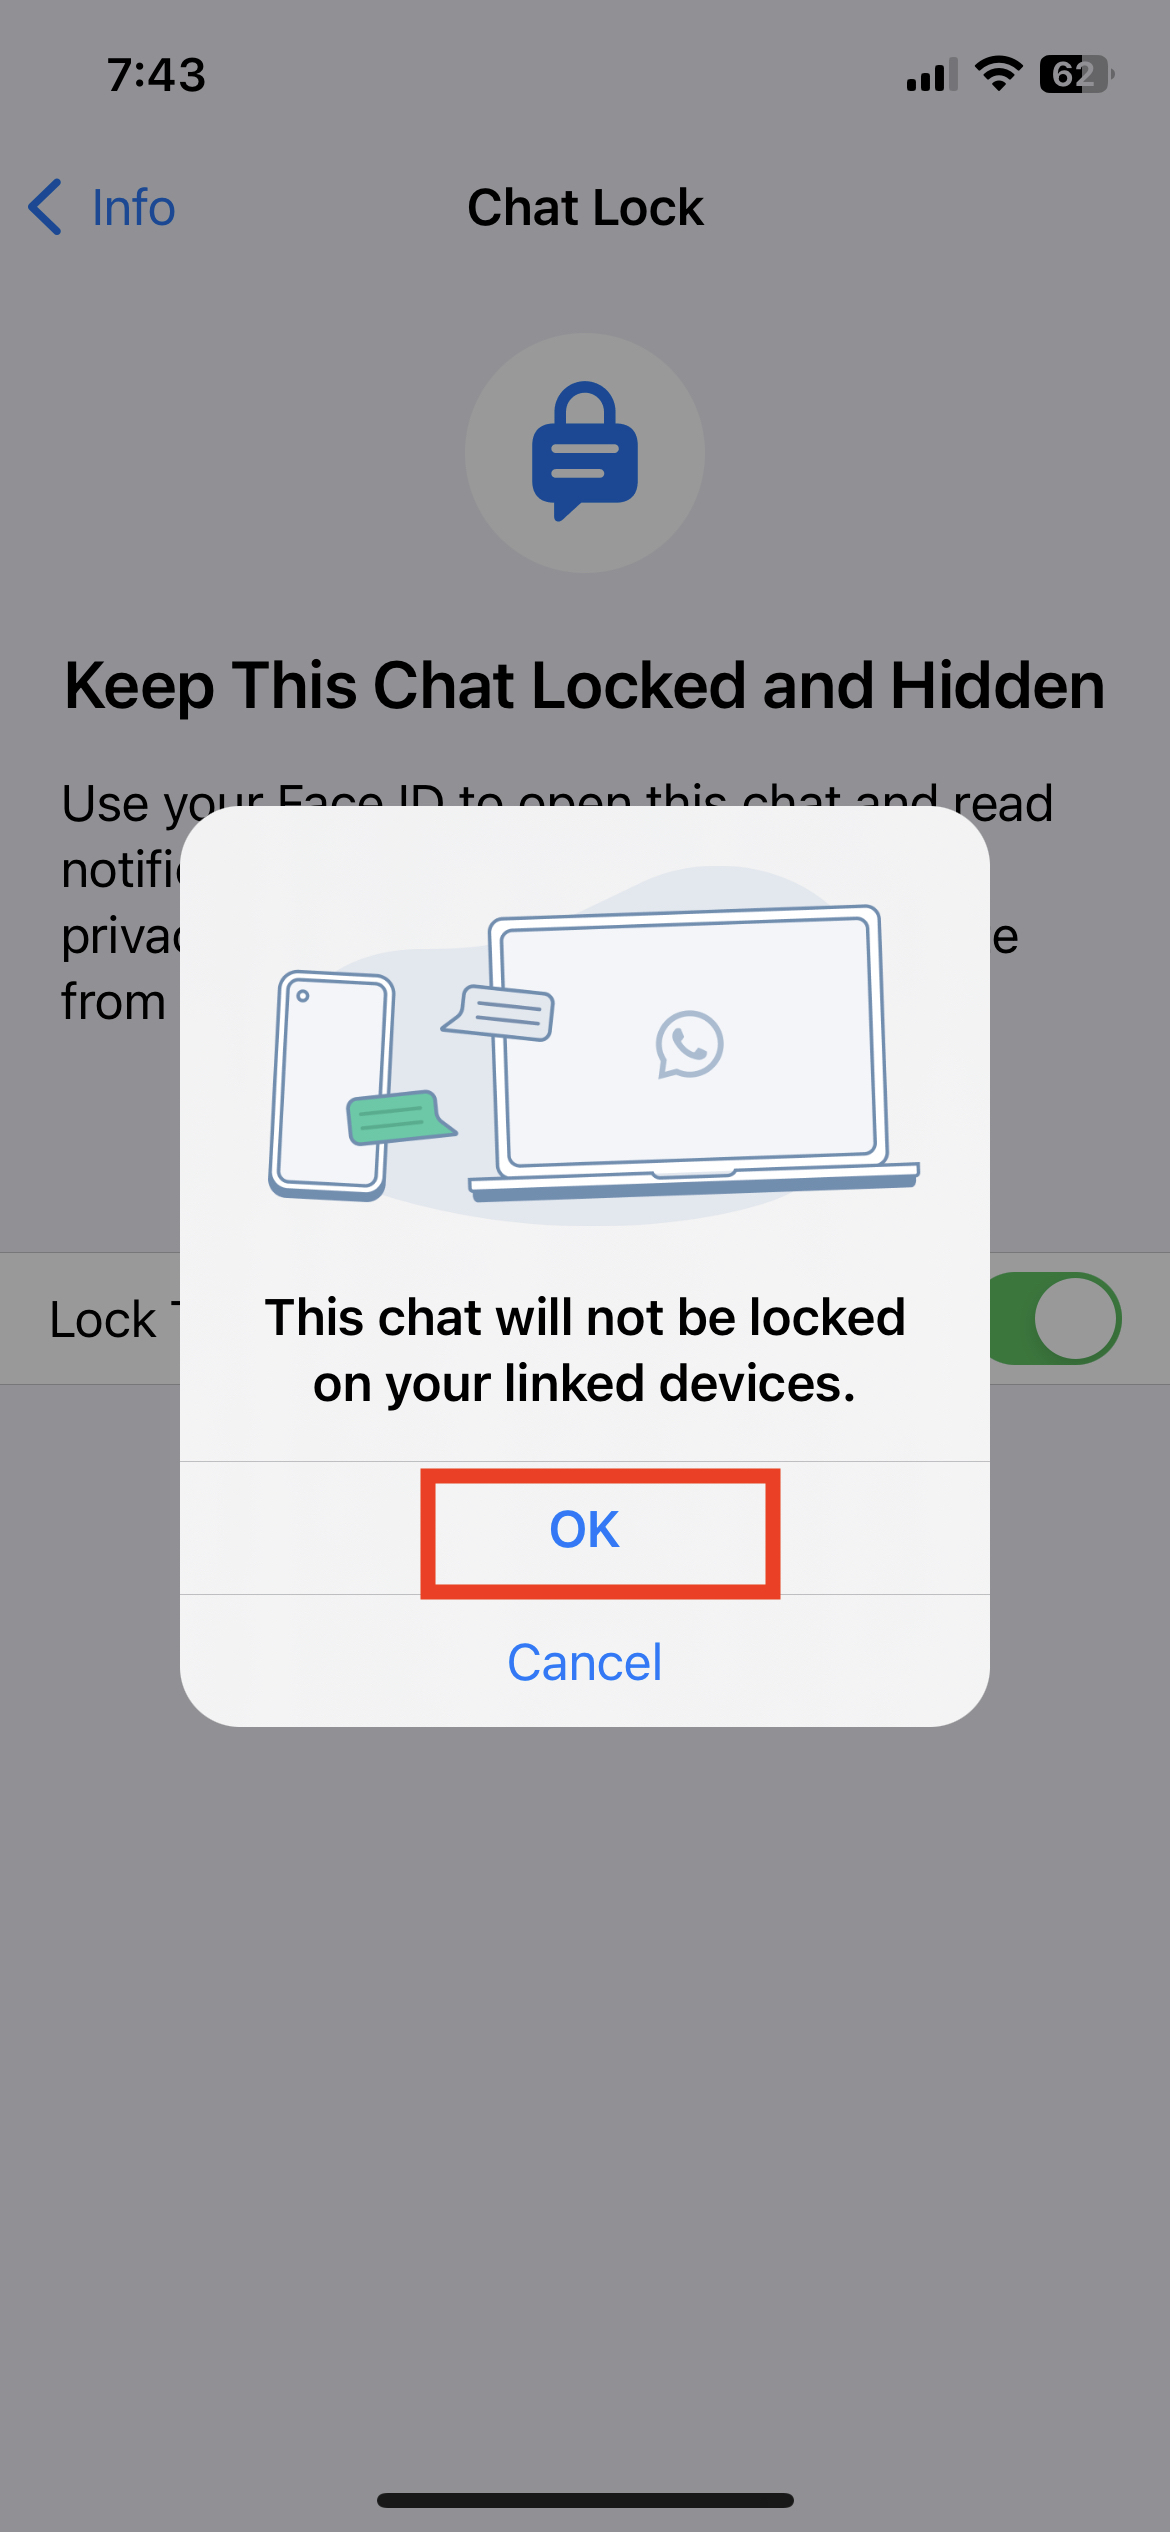 Ok to use chat lock feature in whatsapp